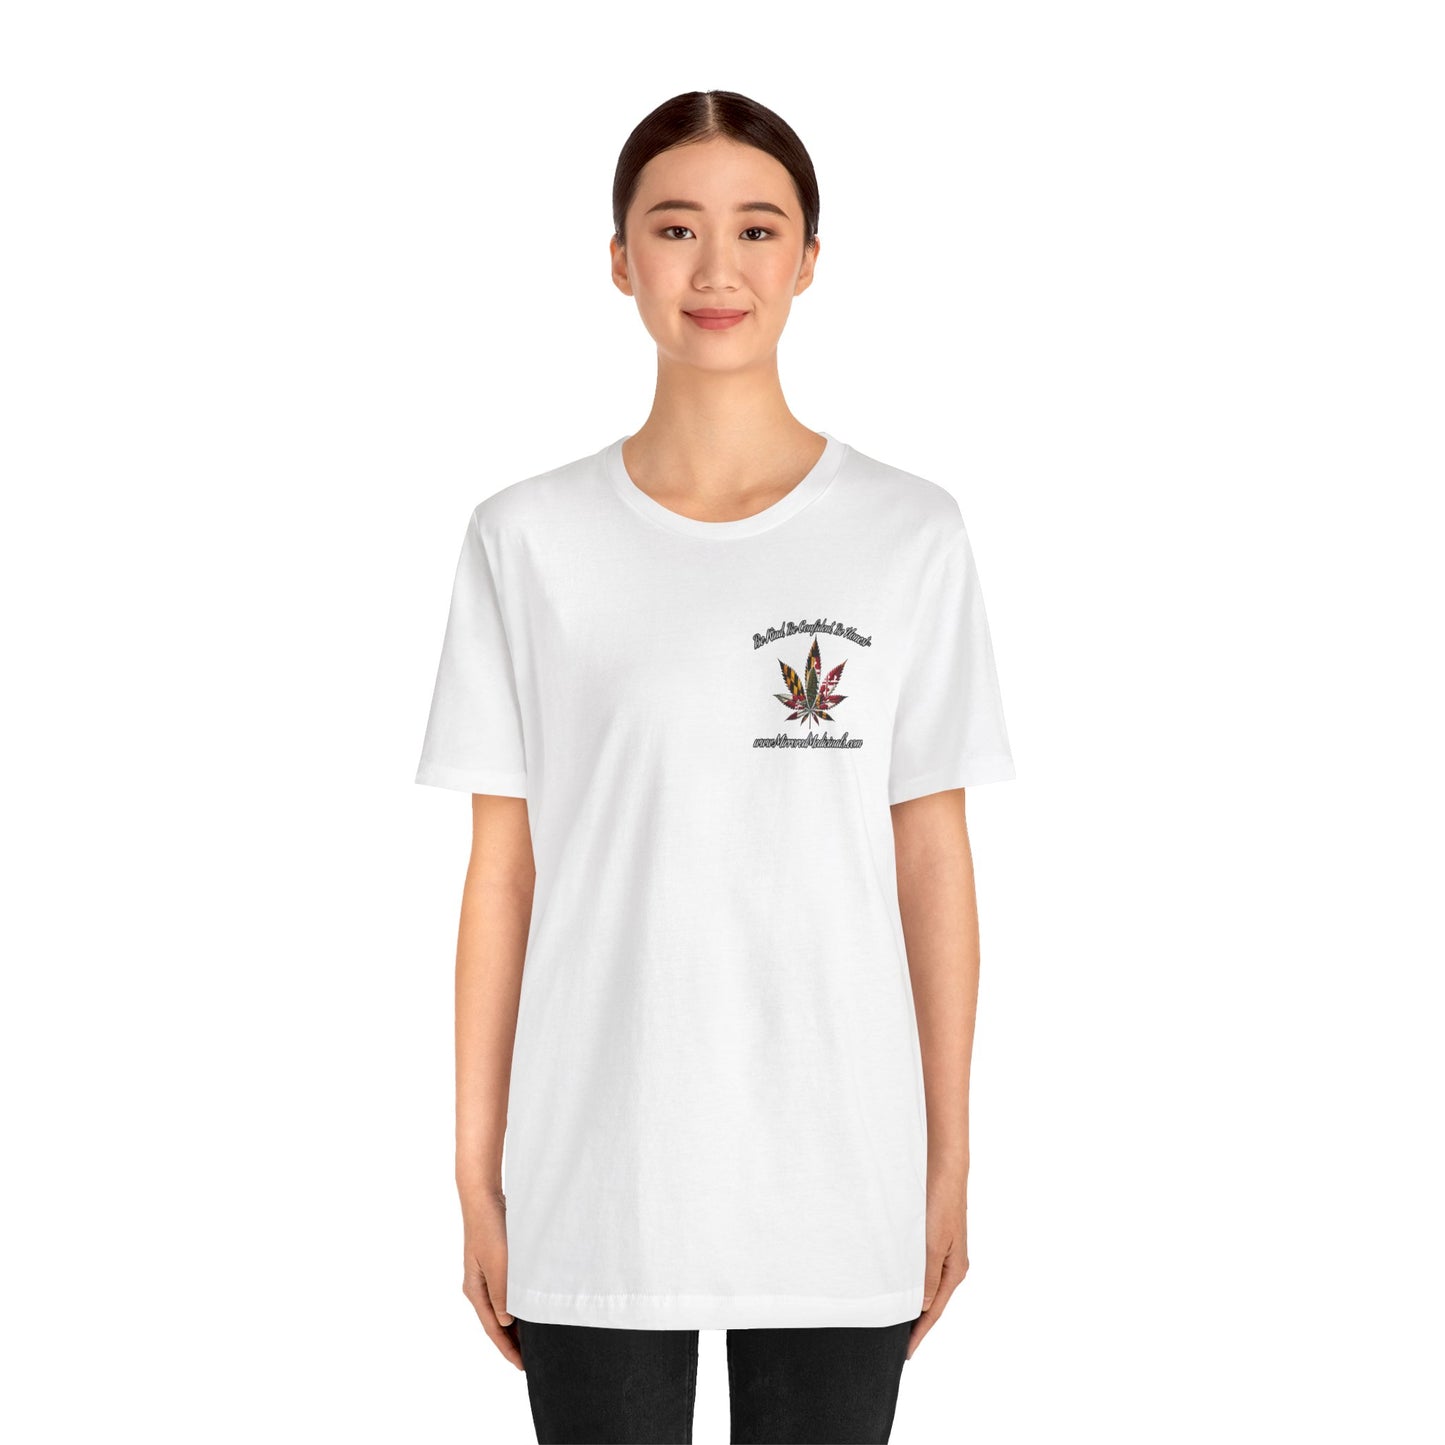 Chit Chat 2 - Unisex Jersey Short Sleeve Tee